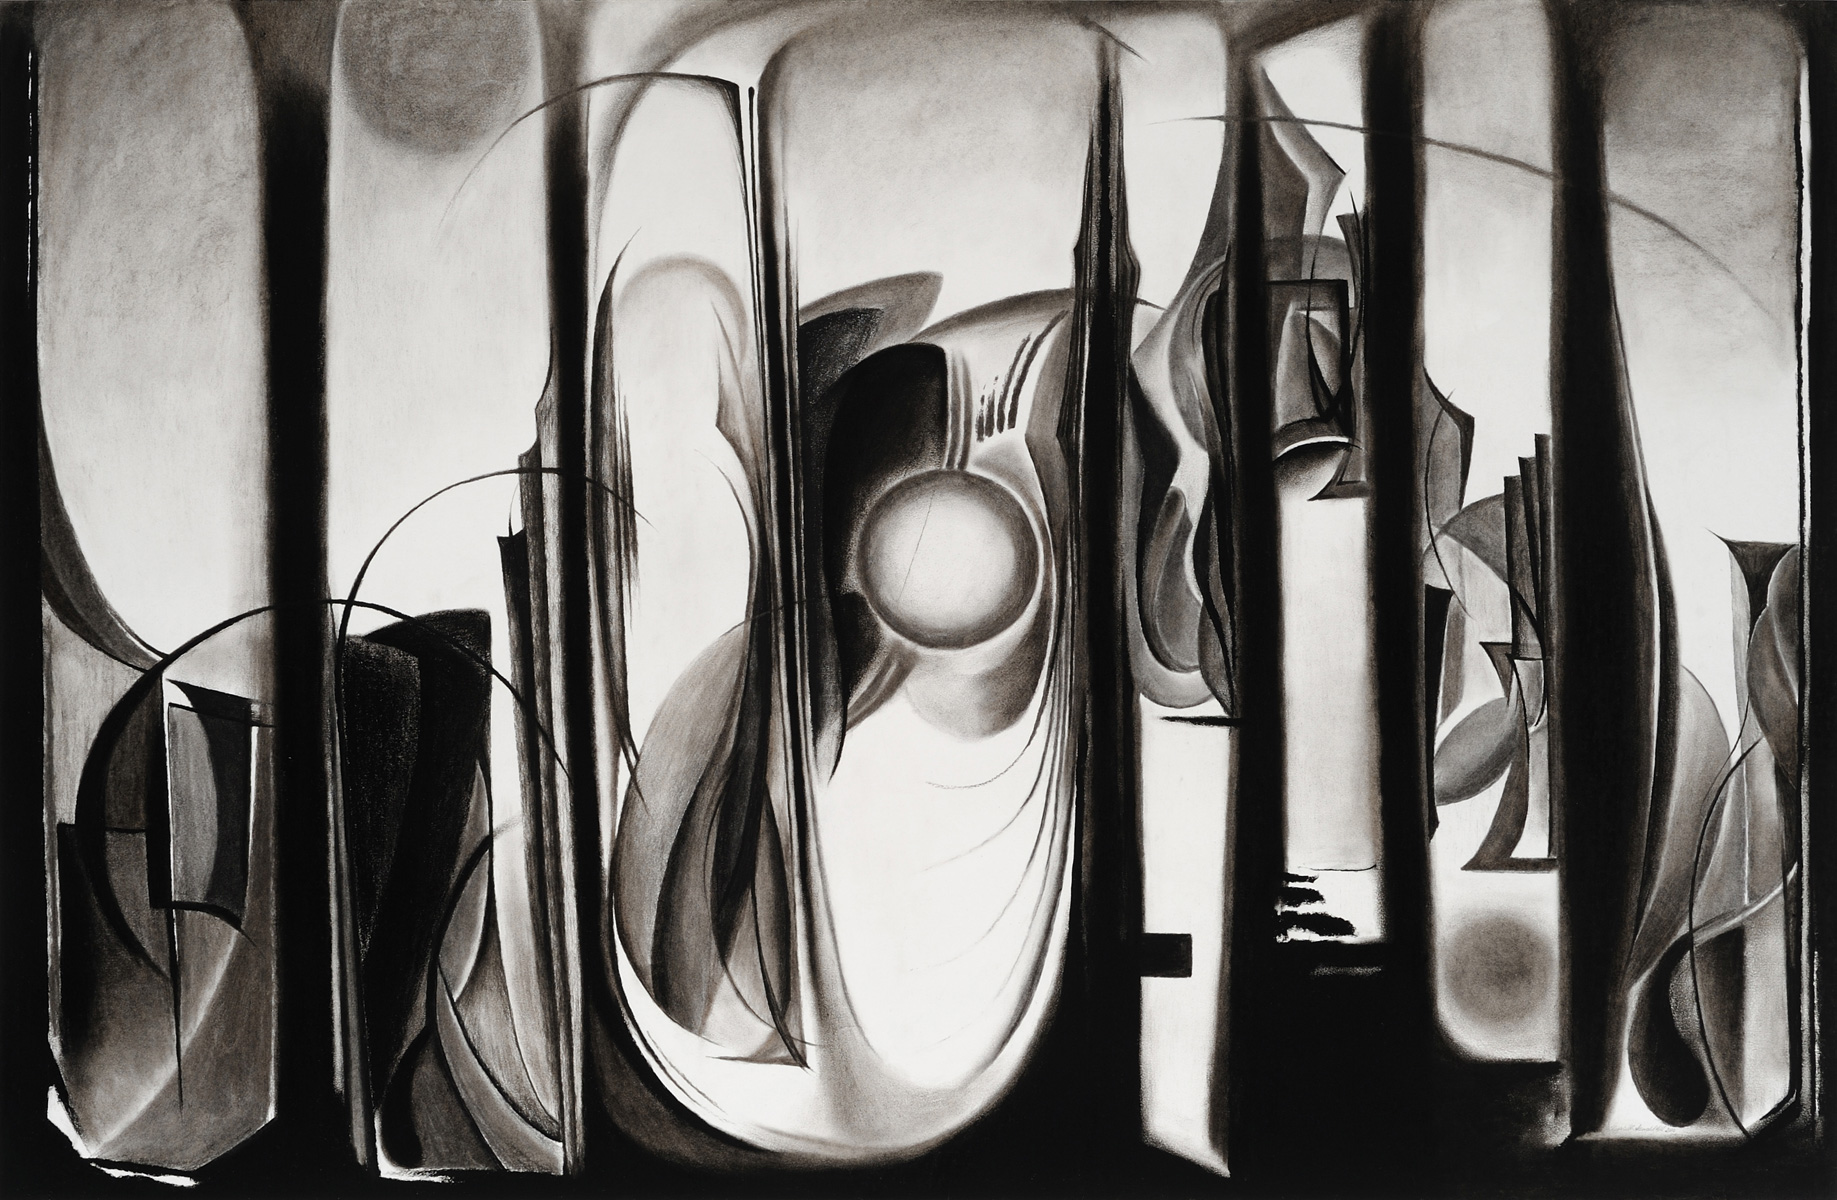 Prelude, 
charcoal on paper, 
26" x 40", 
2010